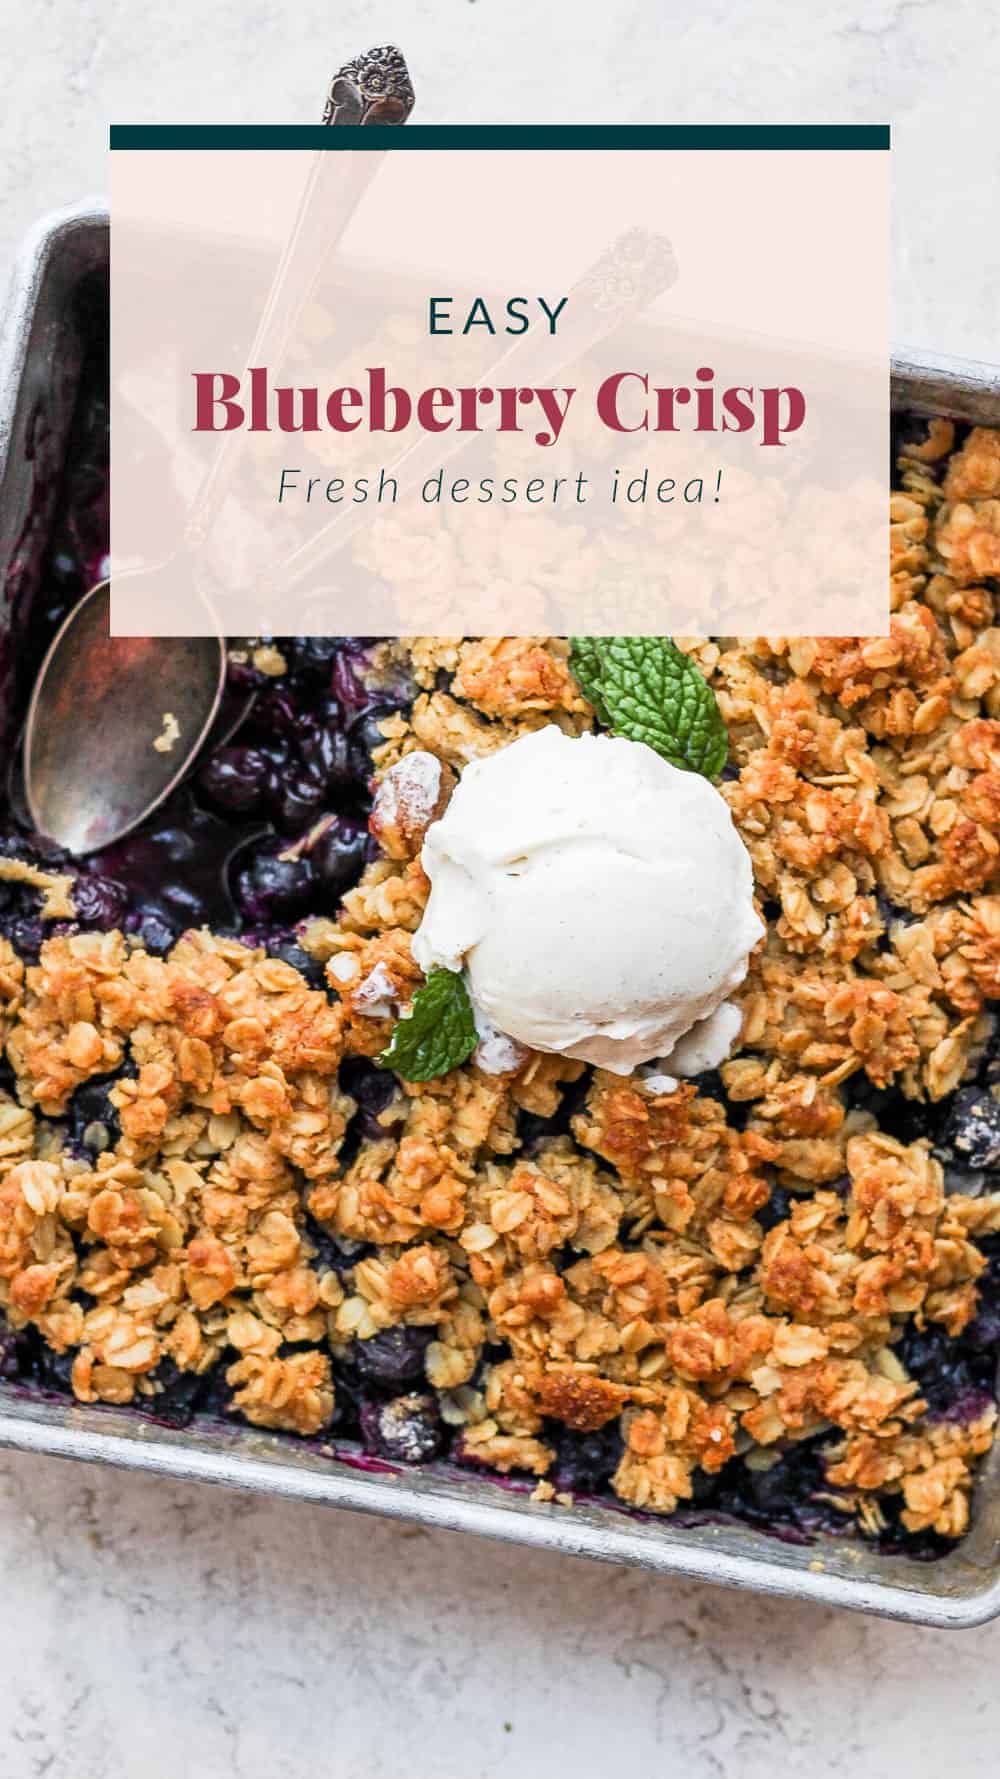 Blueberry Crisp - Fit Foodie Finds